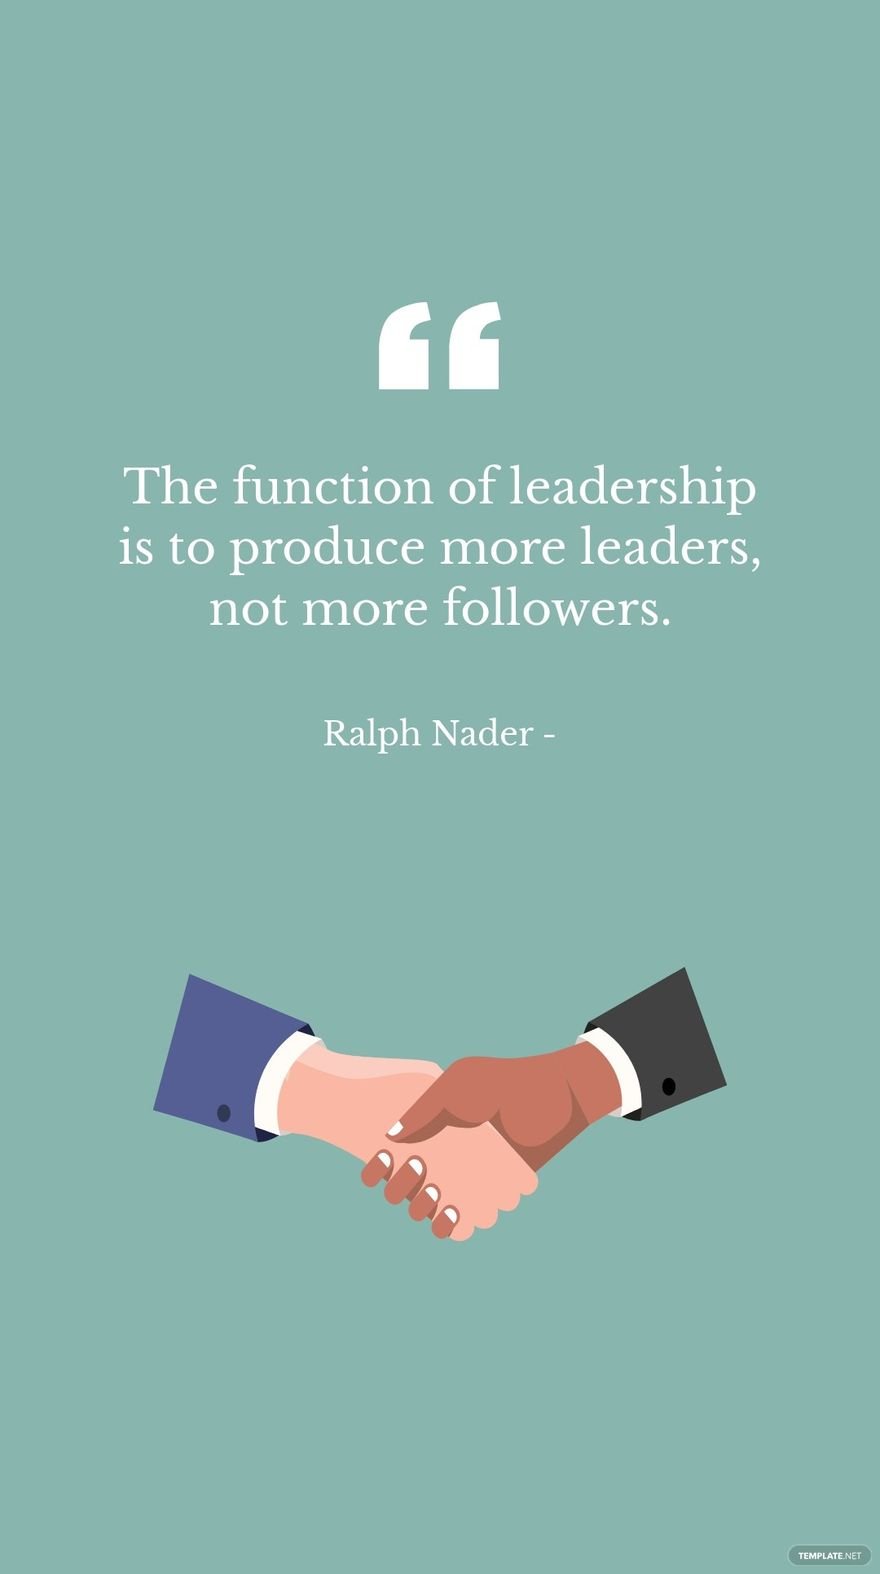 Ralph Nader - The function of leadership is to produce more leaders, not more followers.